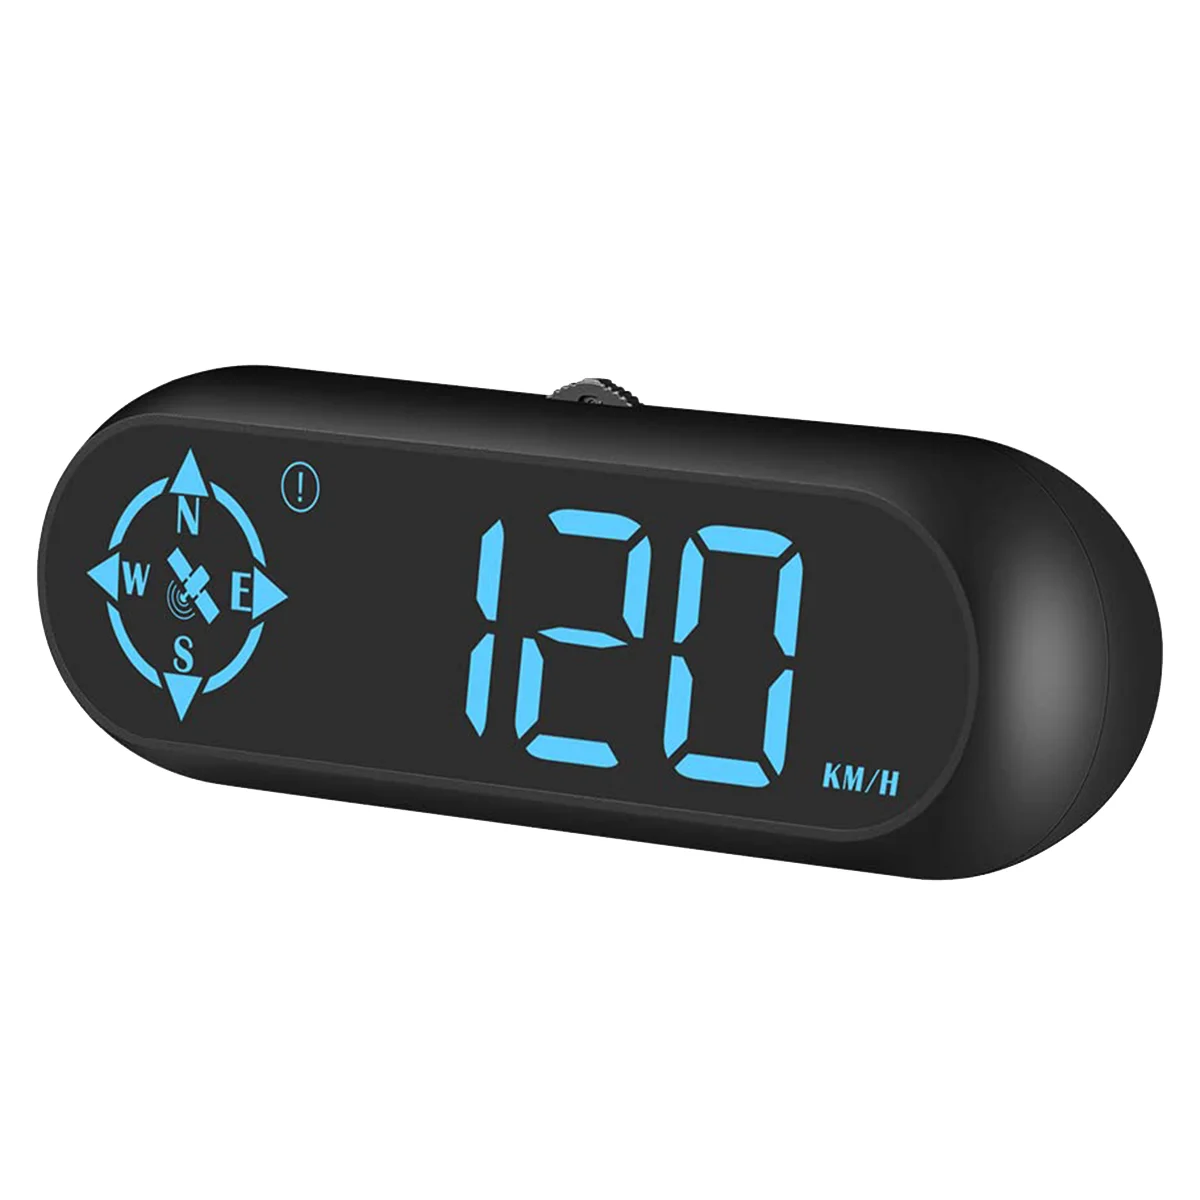 

Digital Car GPS Speedometer, Car HUD Head Up Display with Speed MPH, Compass Driving Direction, Fatigue Driving Reminder